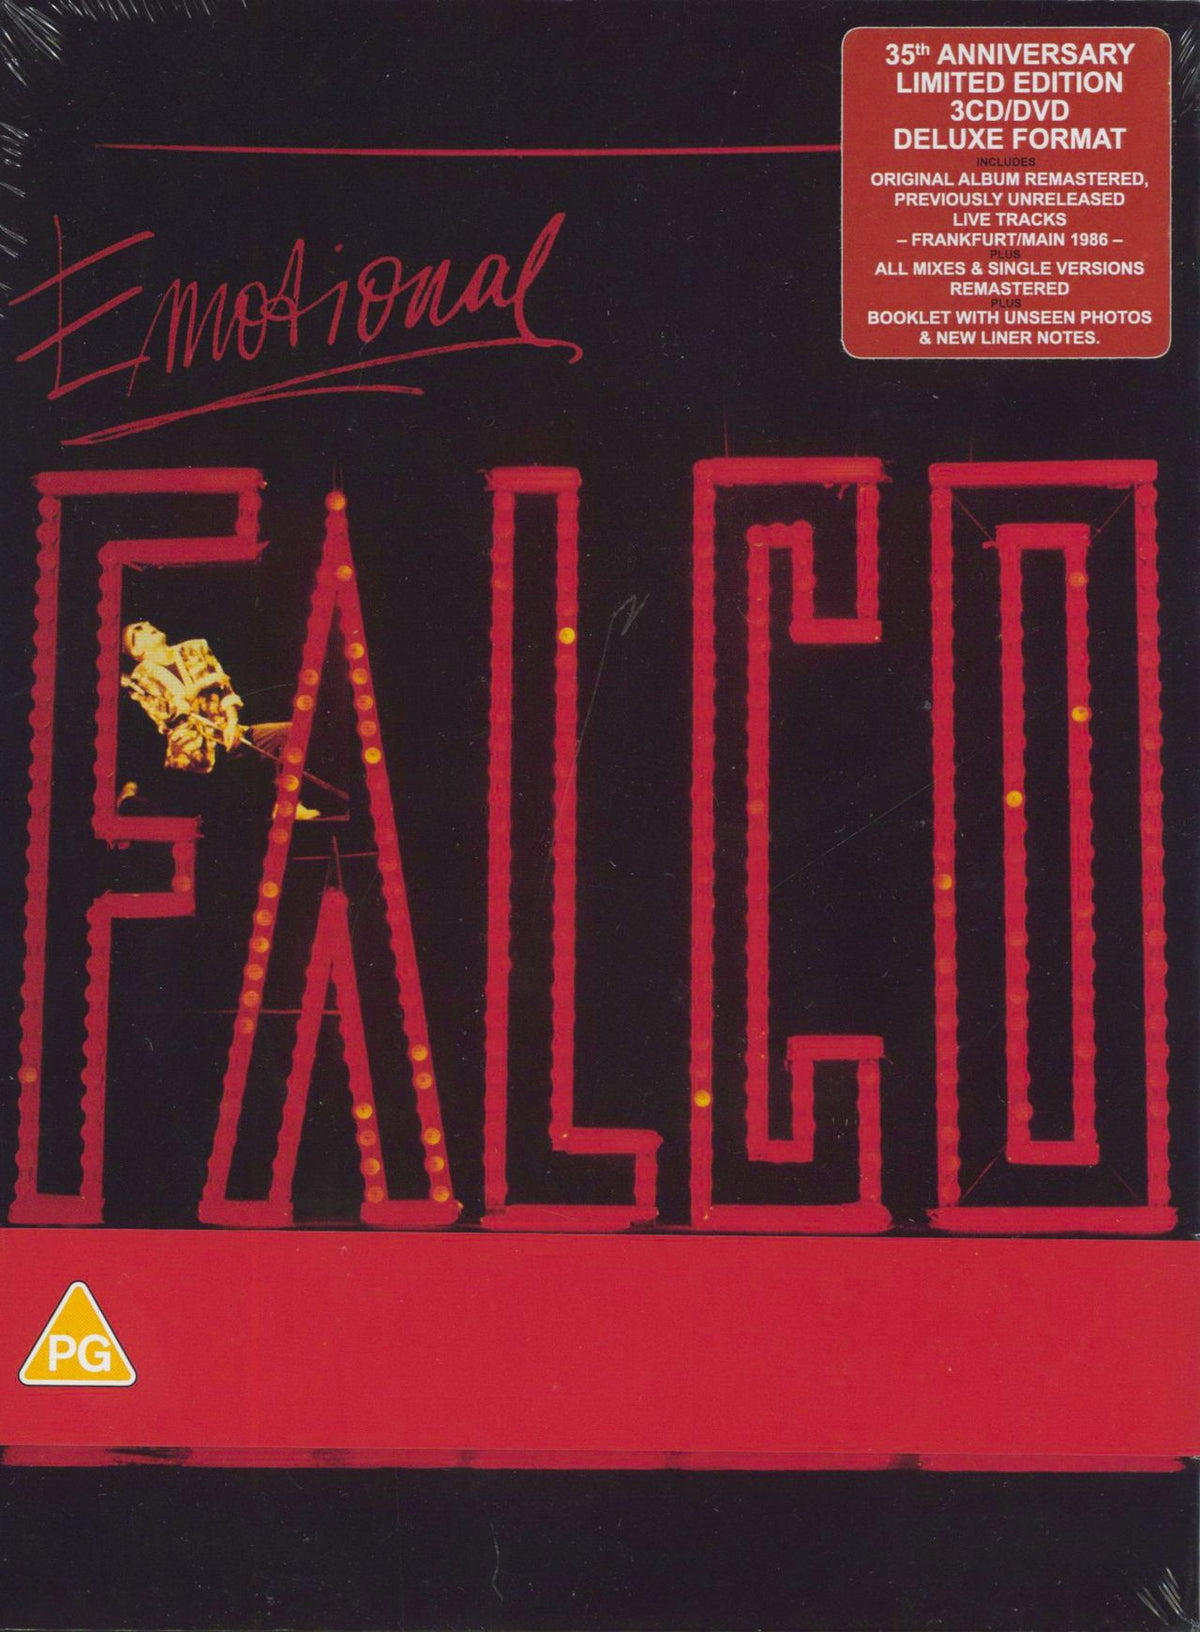 Set　UK　Deluxe　3-disc　Edition　CD/DVD　Sealed　—　Falco　Emotional: